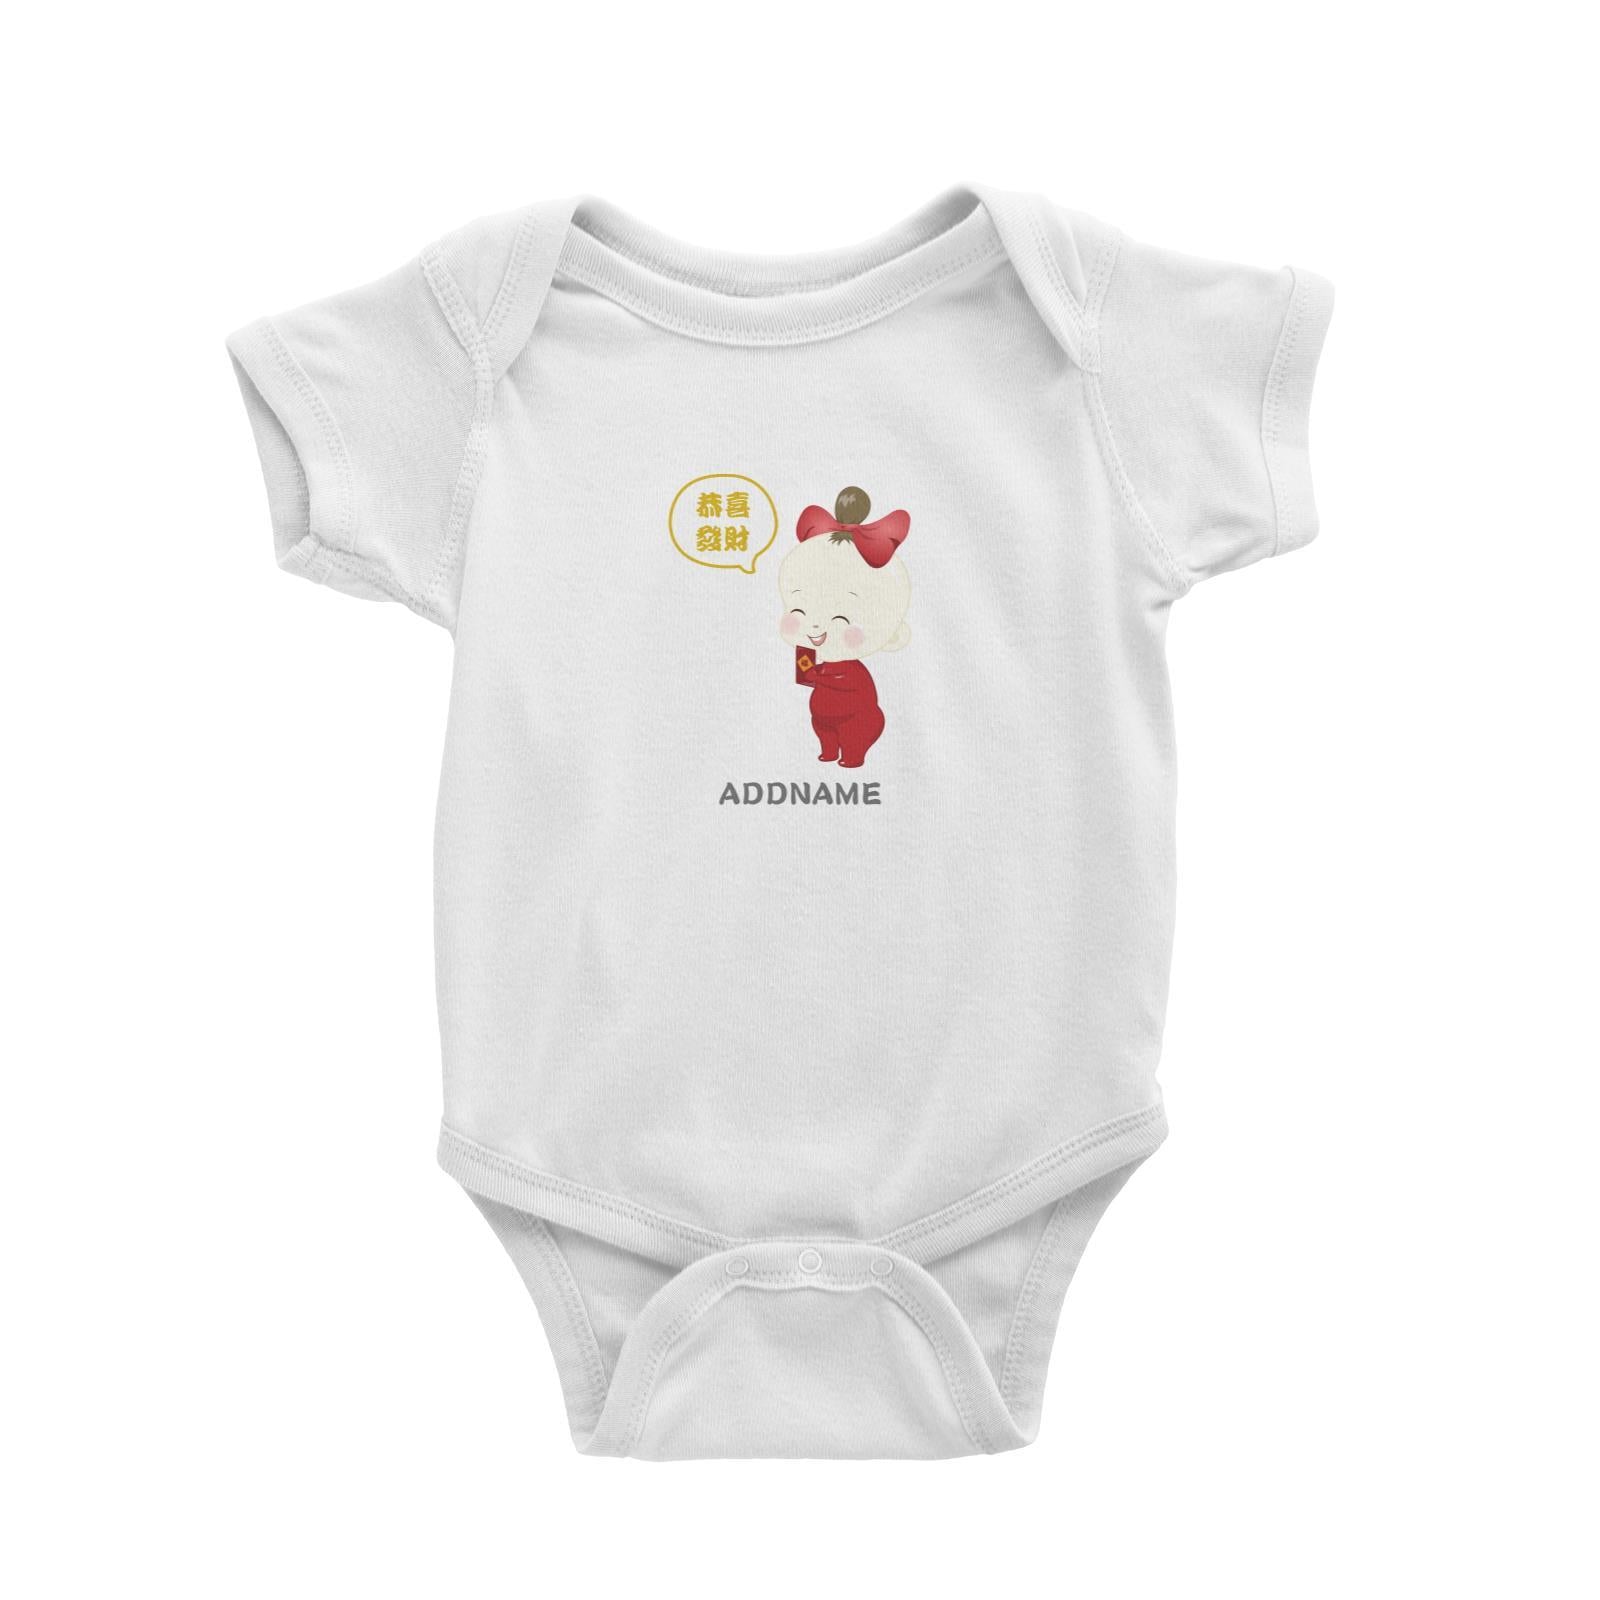 Chinese New Year Family Gong Xi Fai Cai Baby Girl Addname Baby Romper